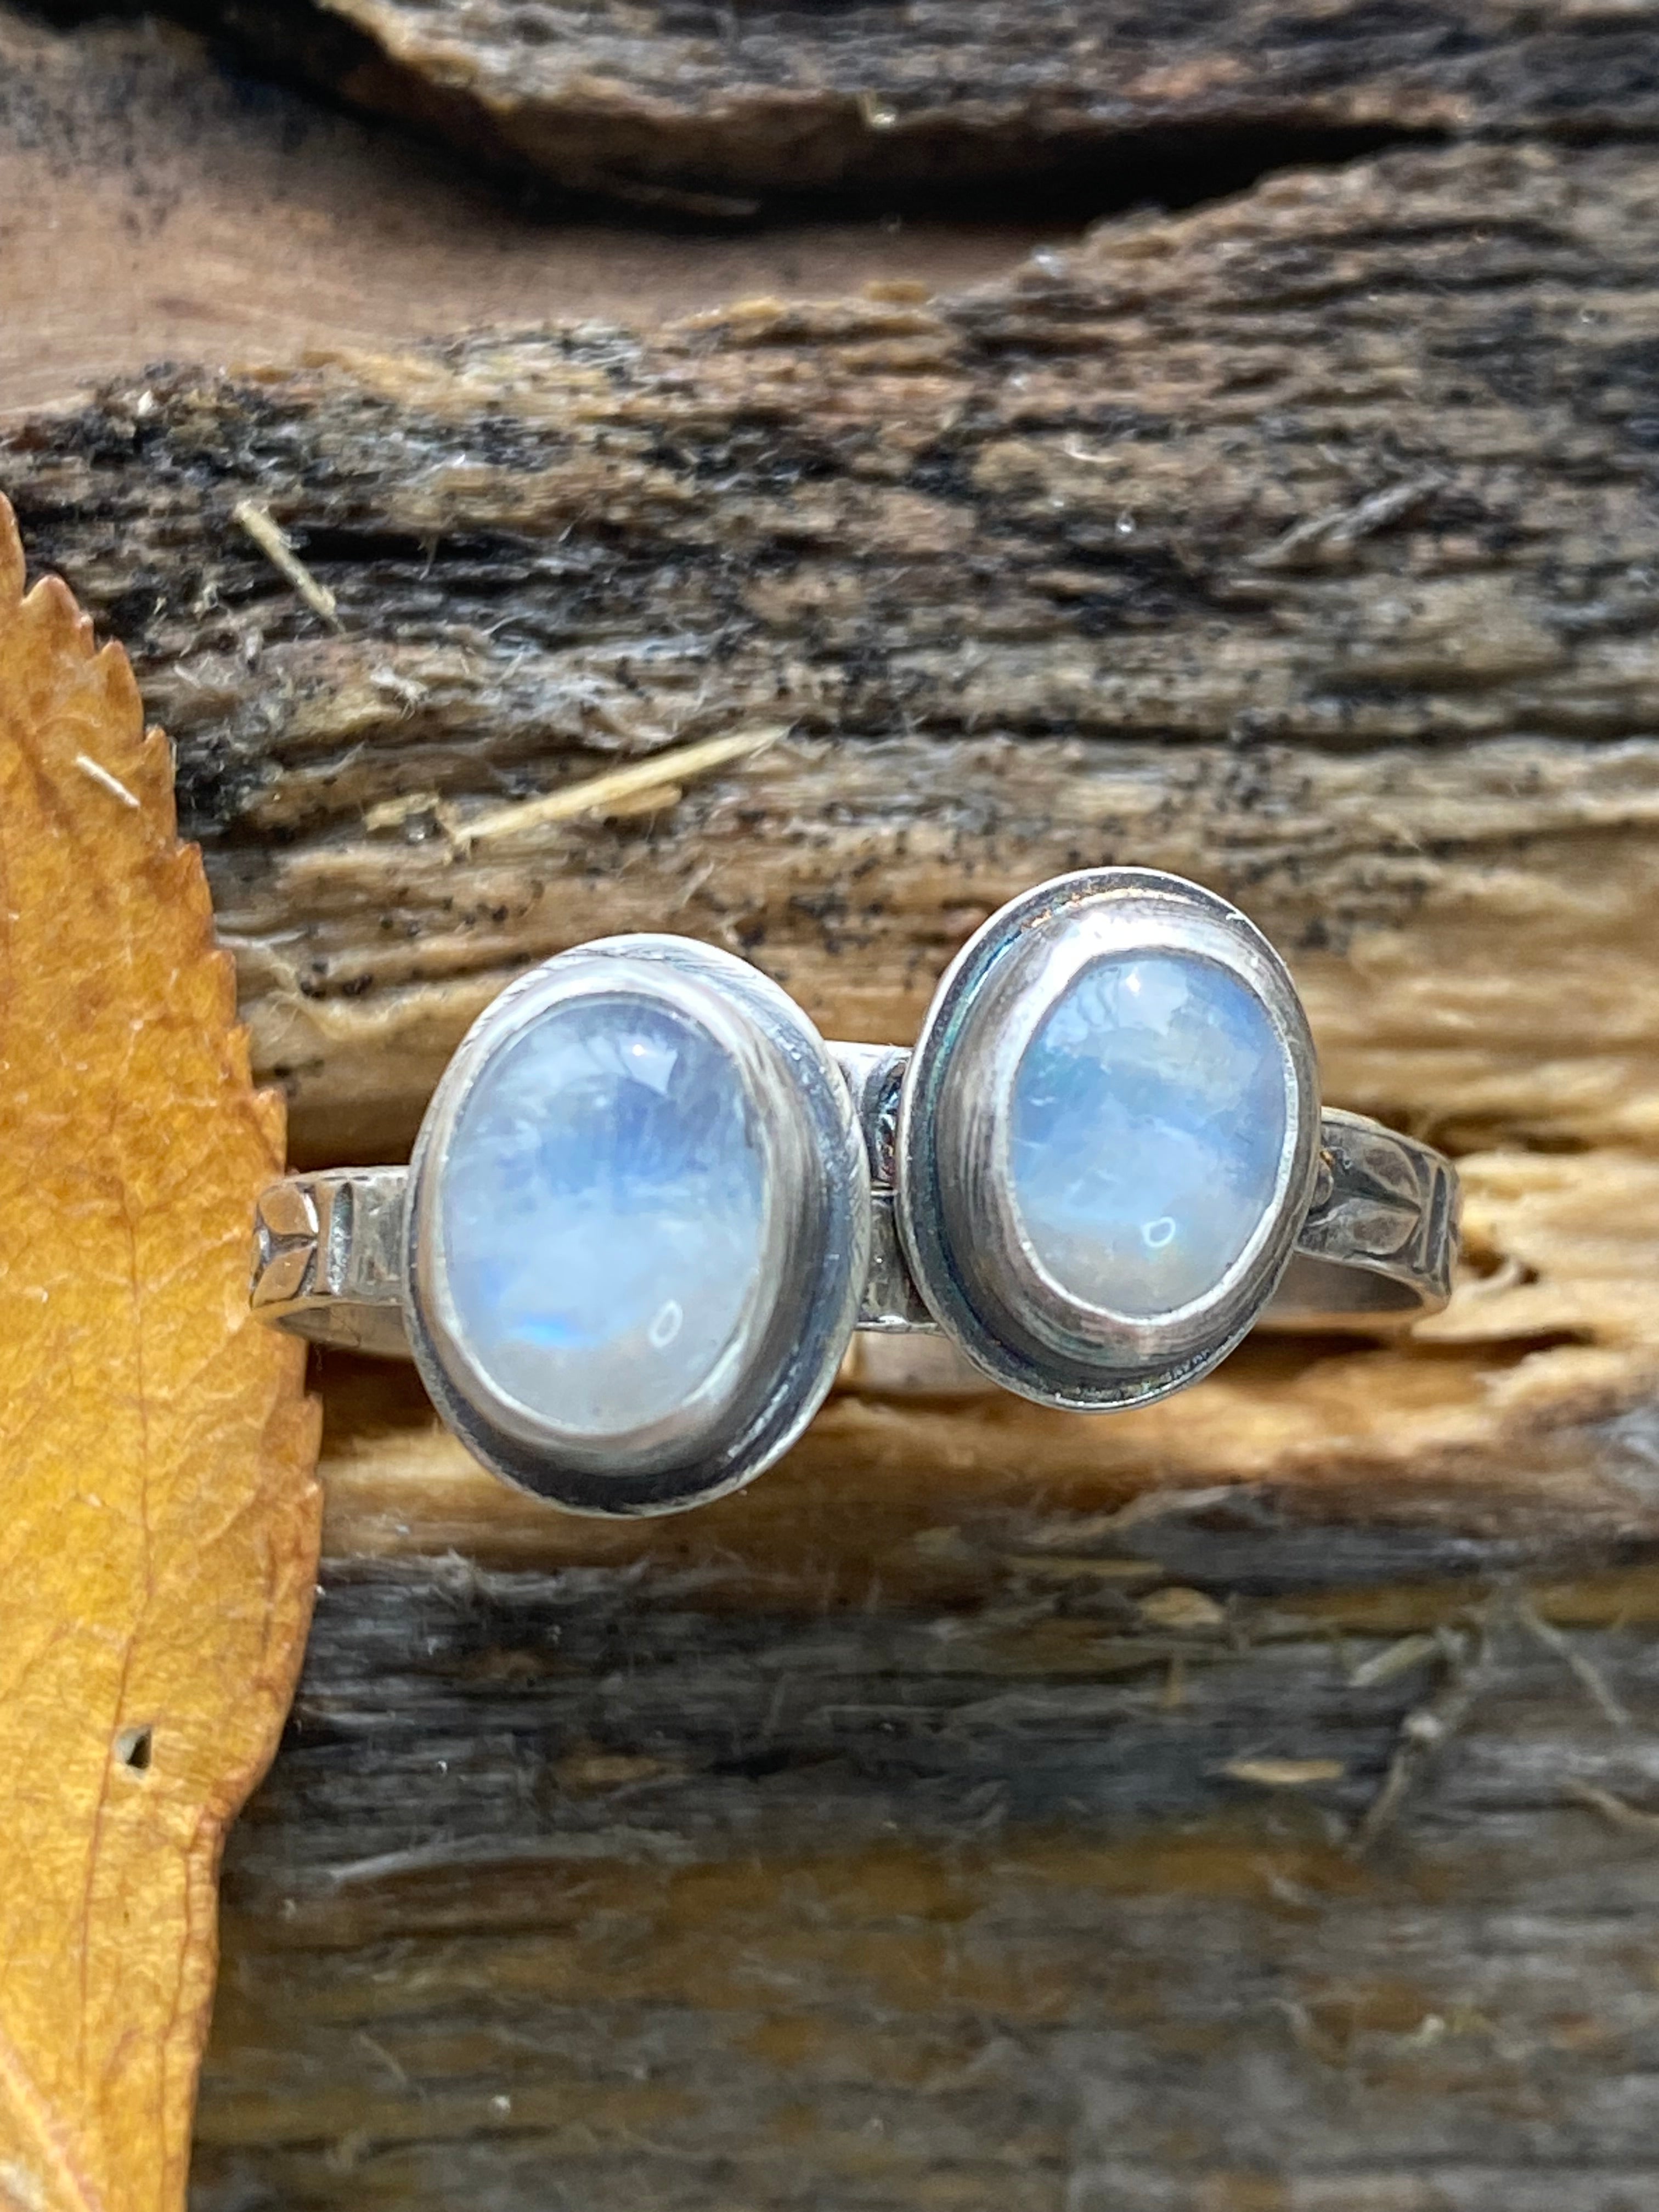 Moonstone Floral Stacking Rings